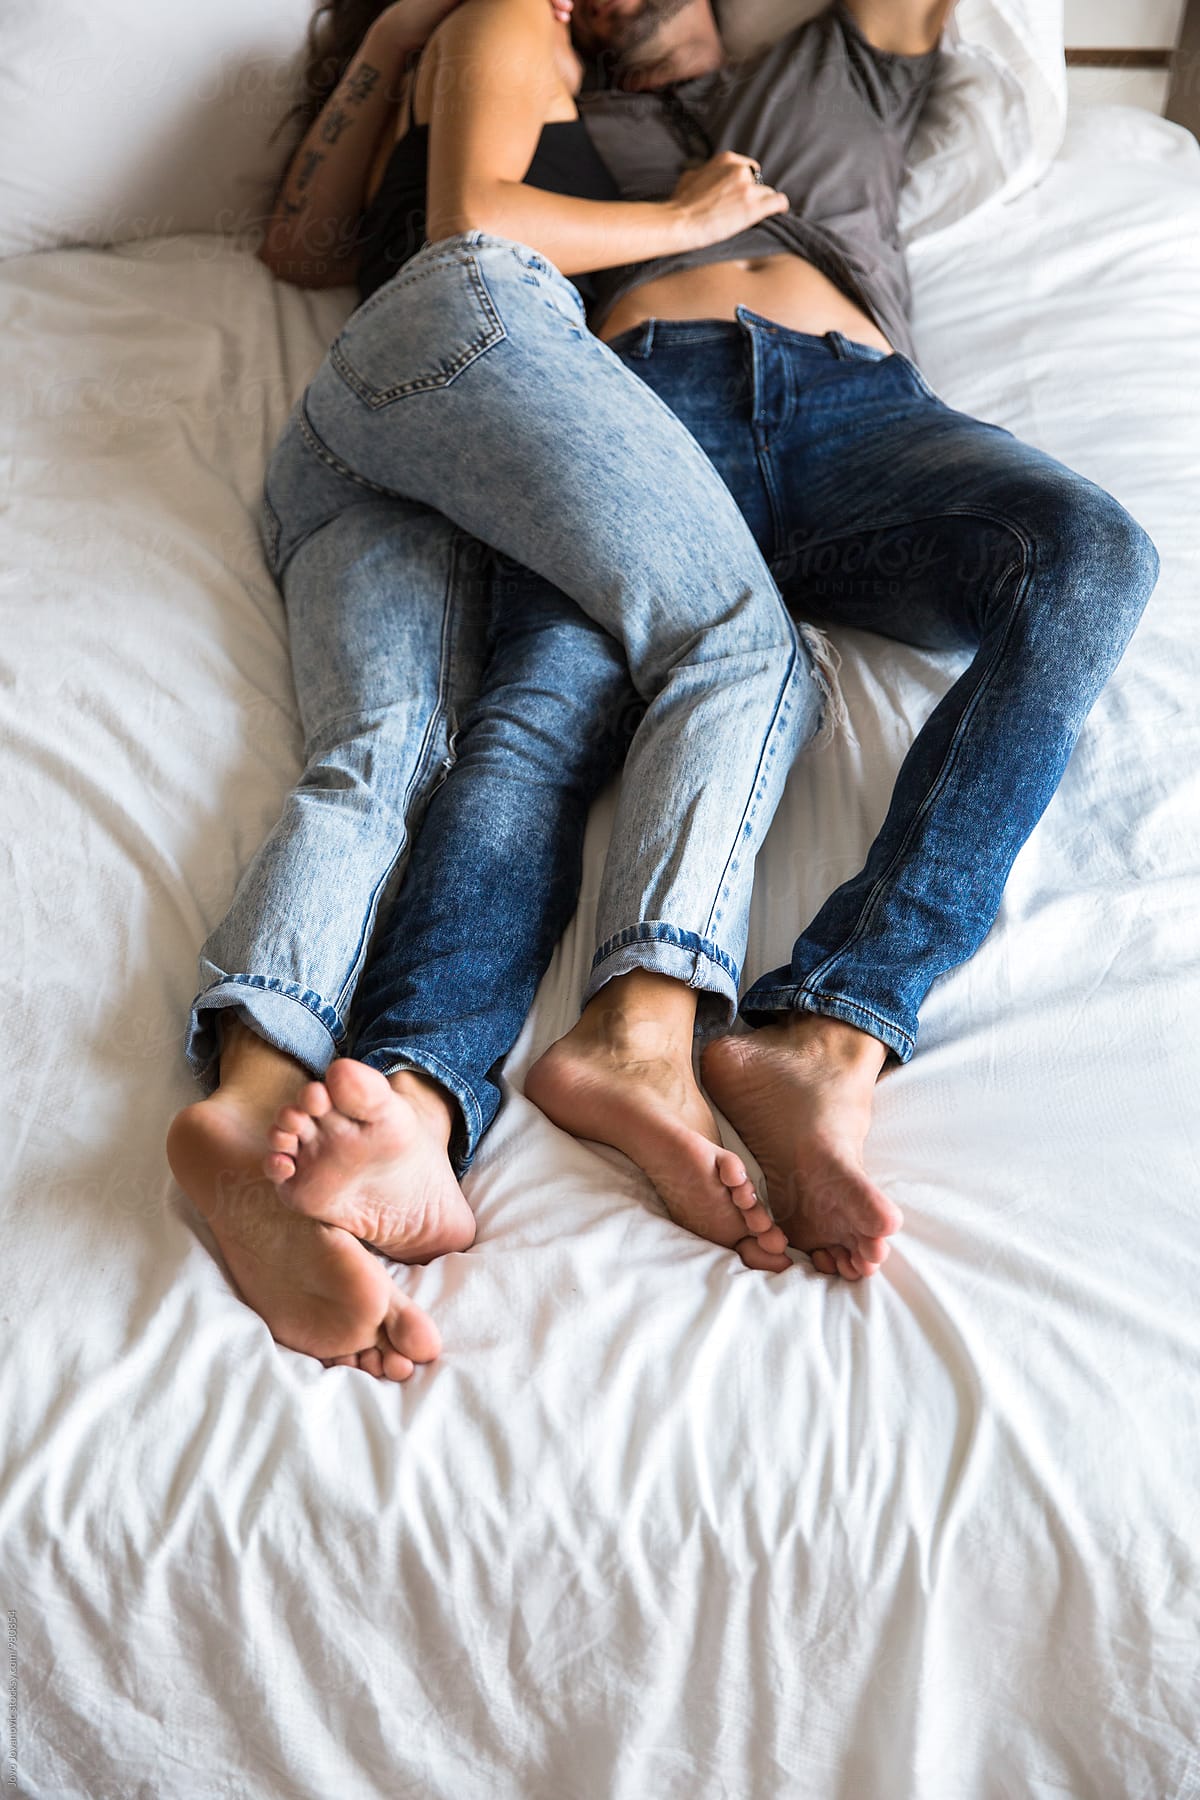 Couple In Bed Wearing Jeans By Stocksy Contributor Jovo Jovanovic Stocksy